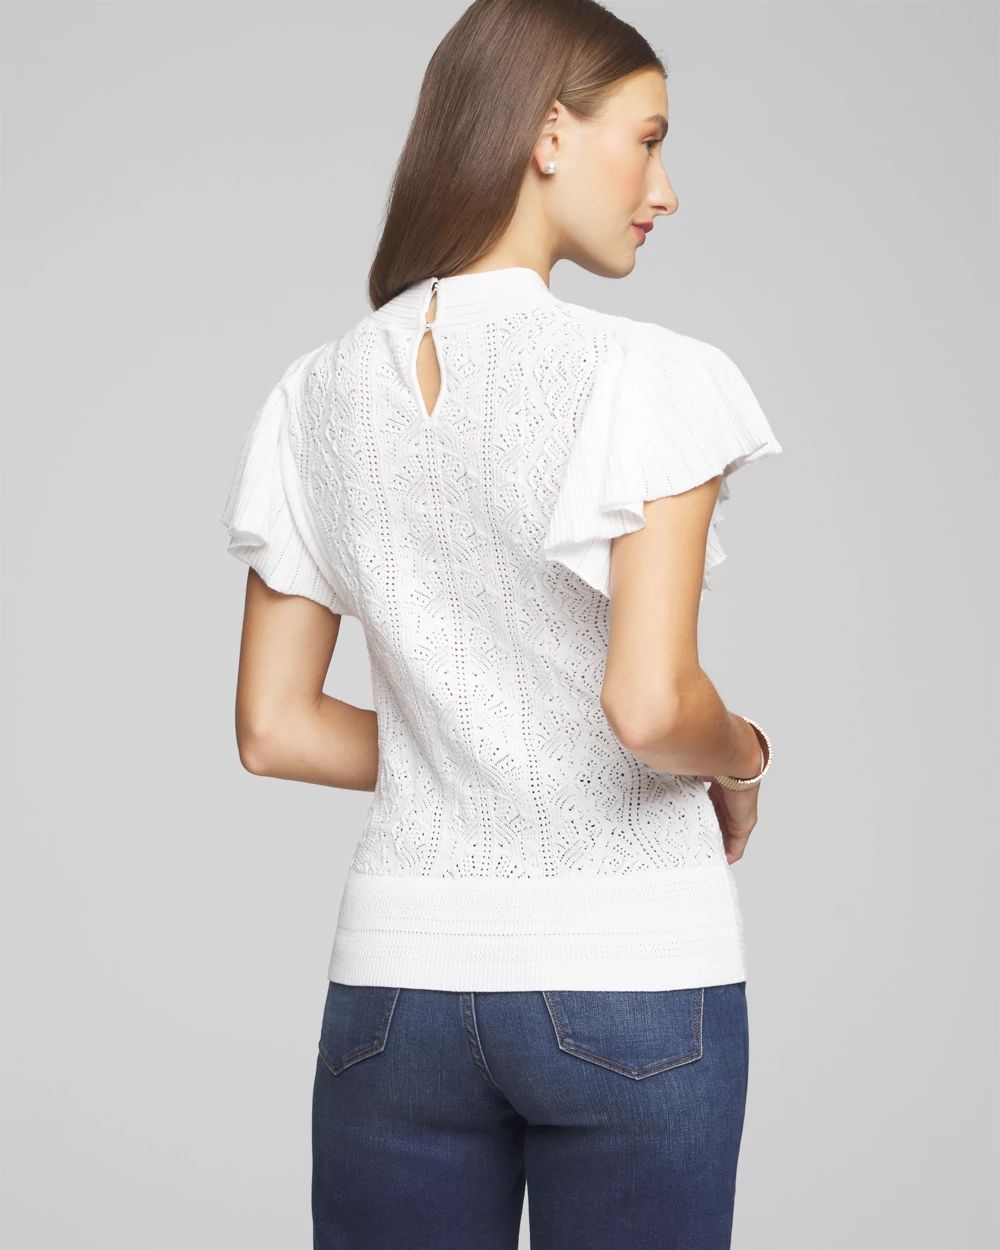 Lace Stitch Ruffle Sleeve Pullover click to view larger image.